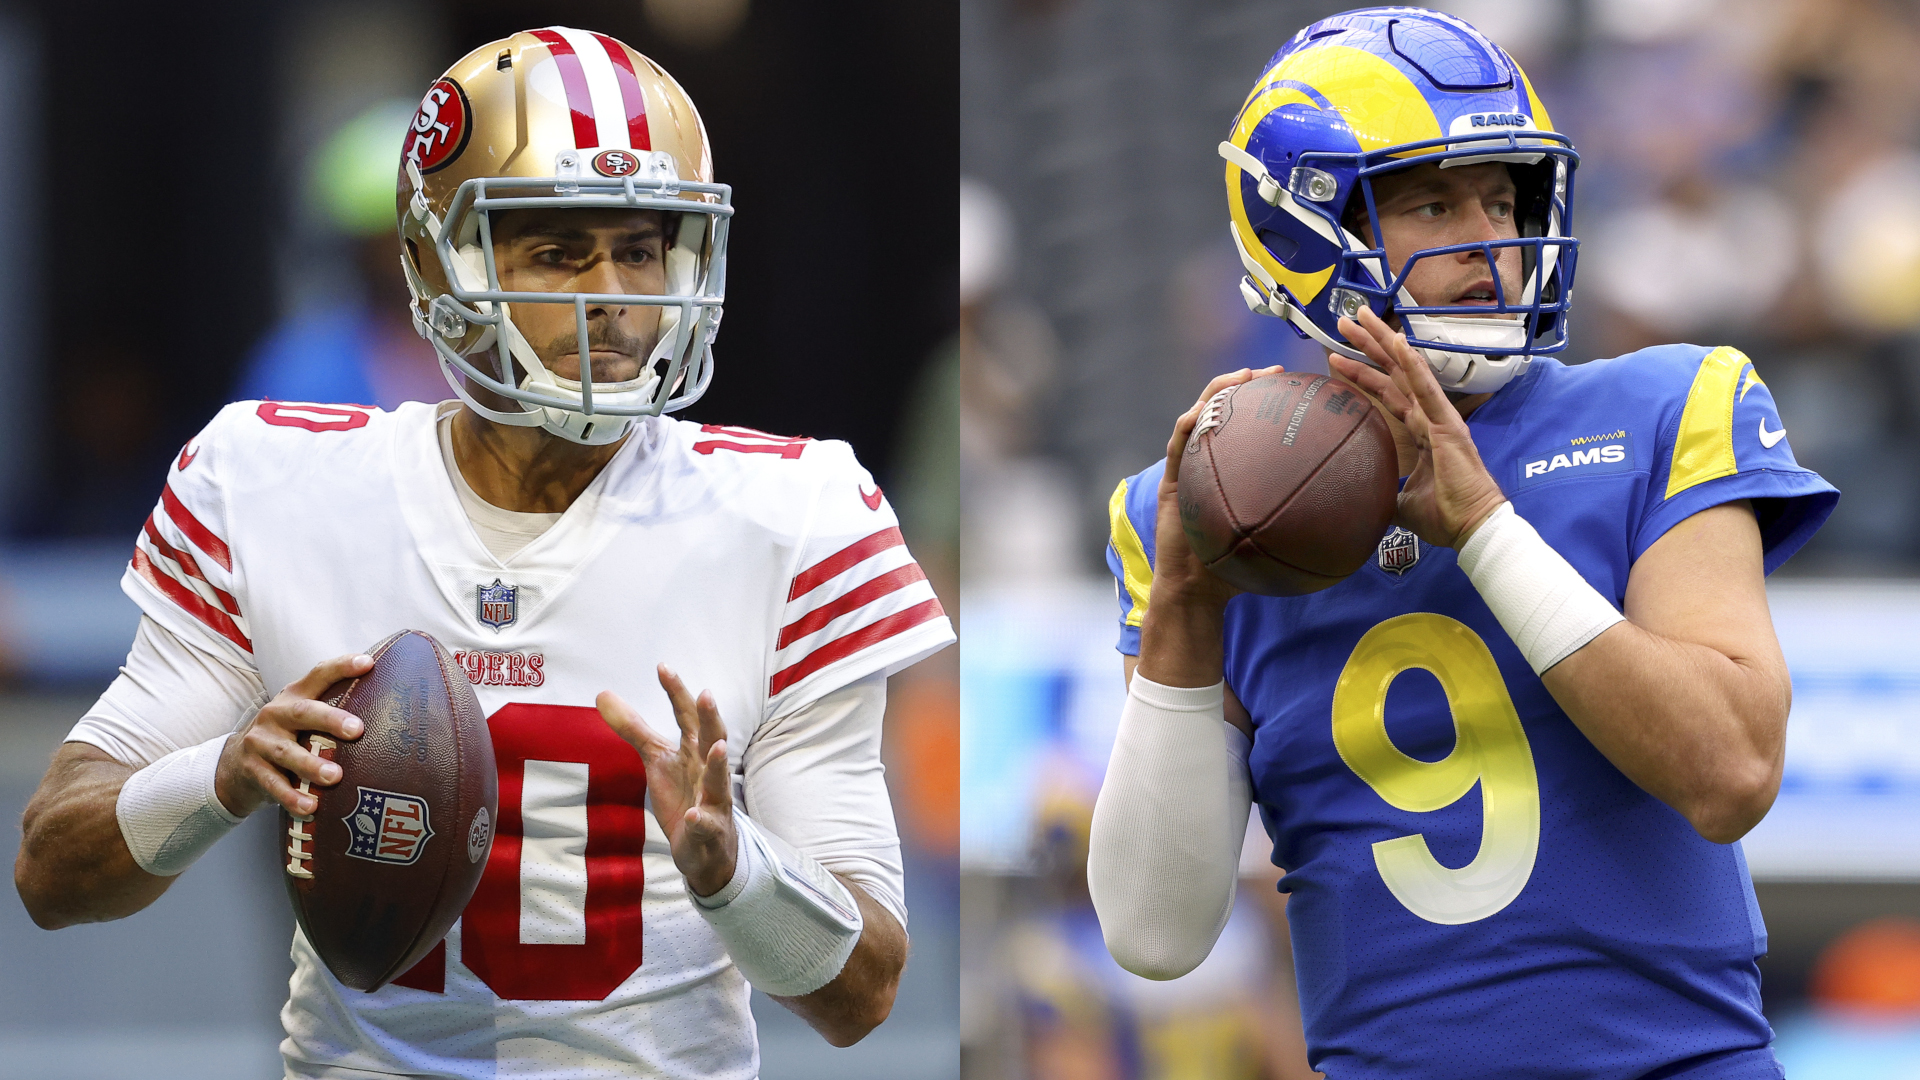 49ers vs Rams live stream: how to watch NFL online and on TV from